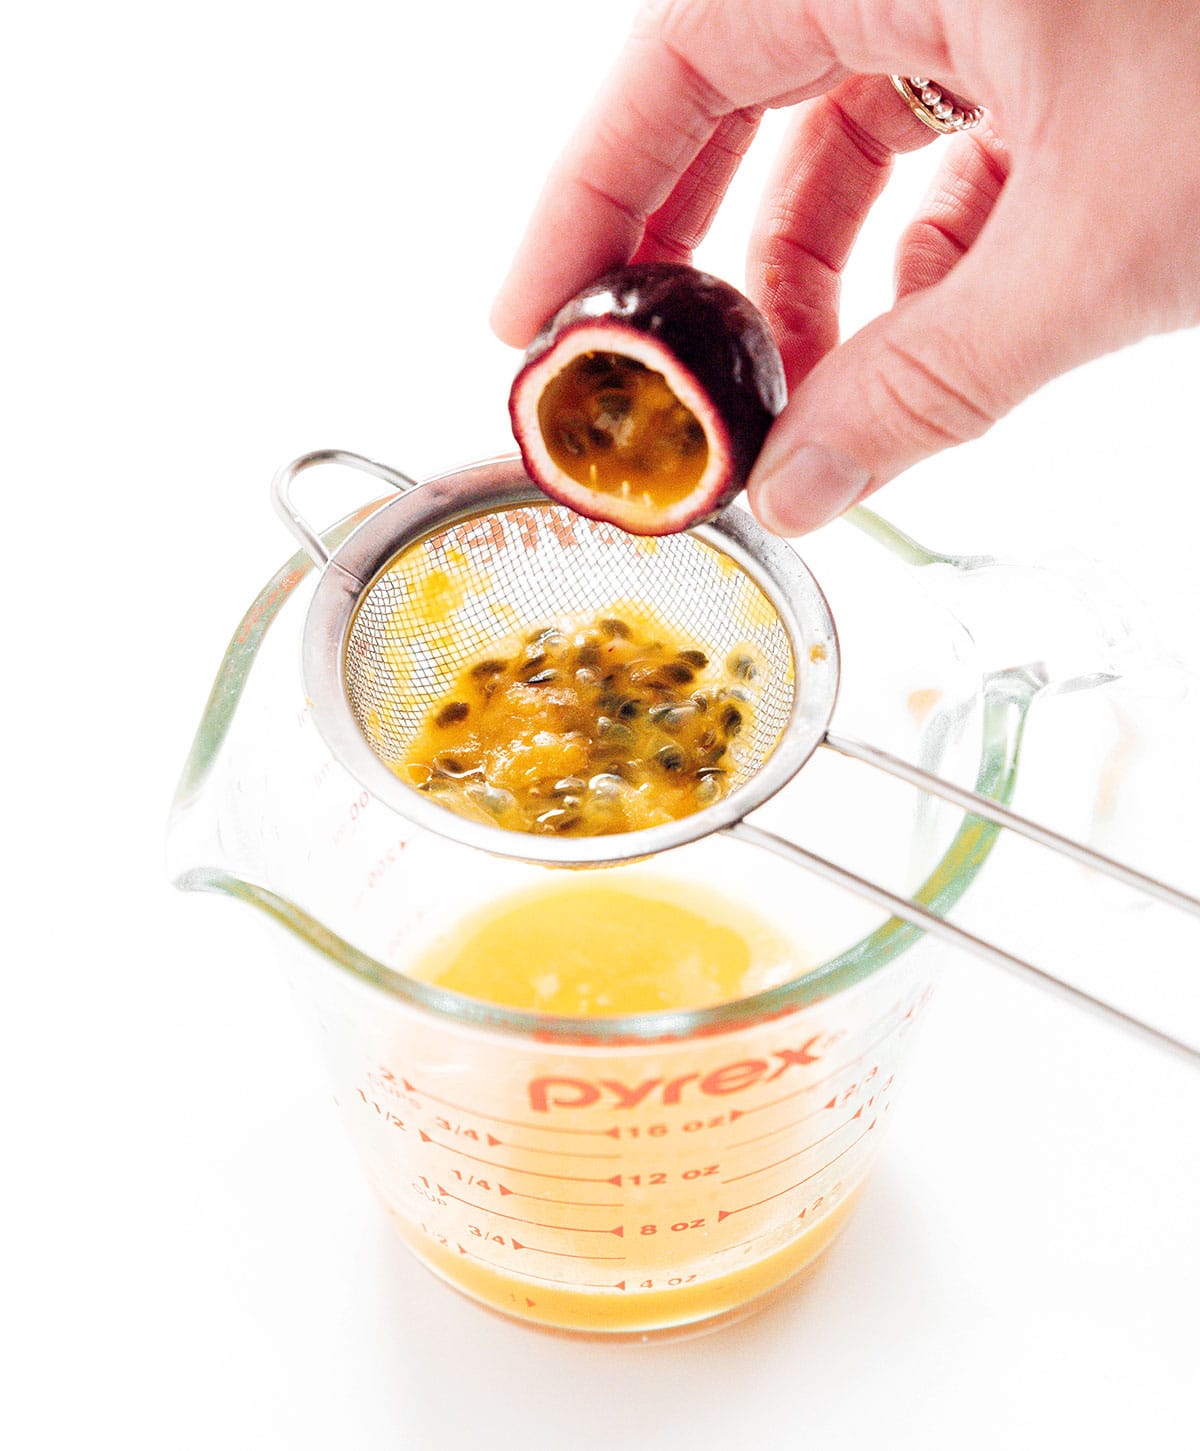 A hand emptying a cut open passion fruit into a small strainer over a measuring cup.